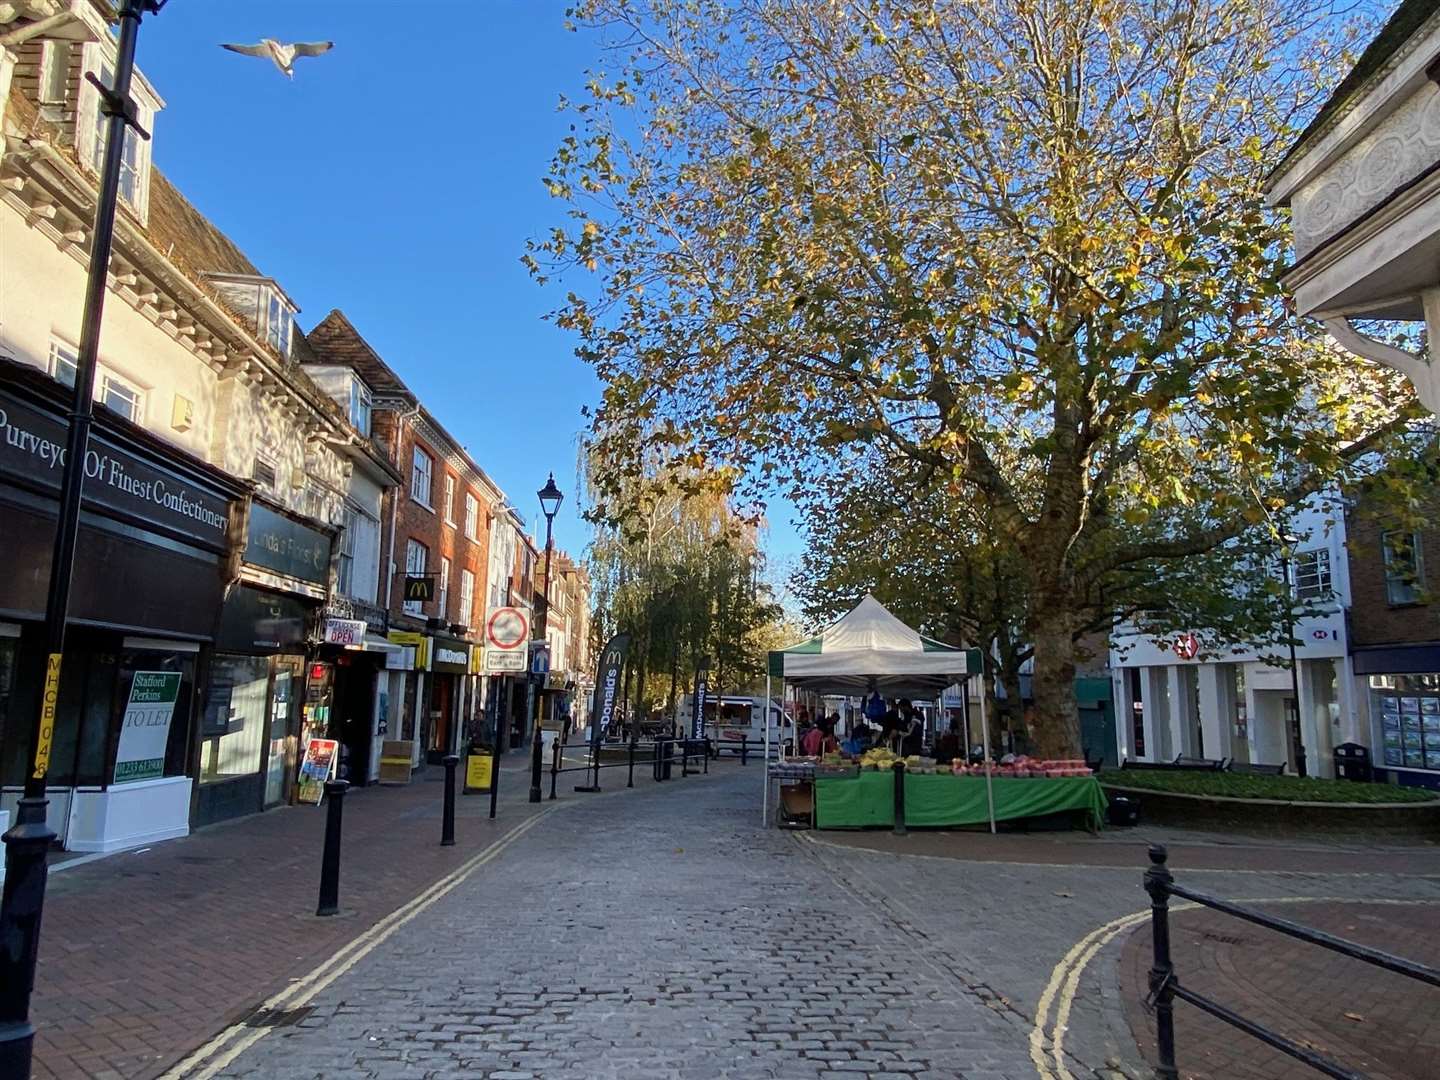 Ashford town centre businesses are set to benefit from the new support package